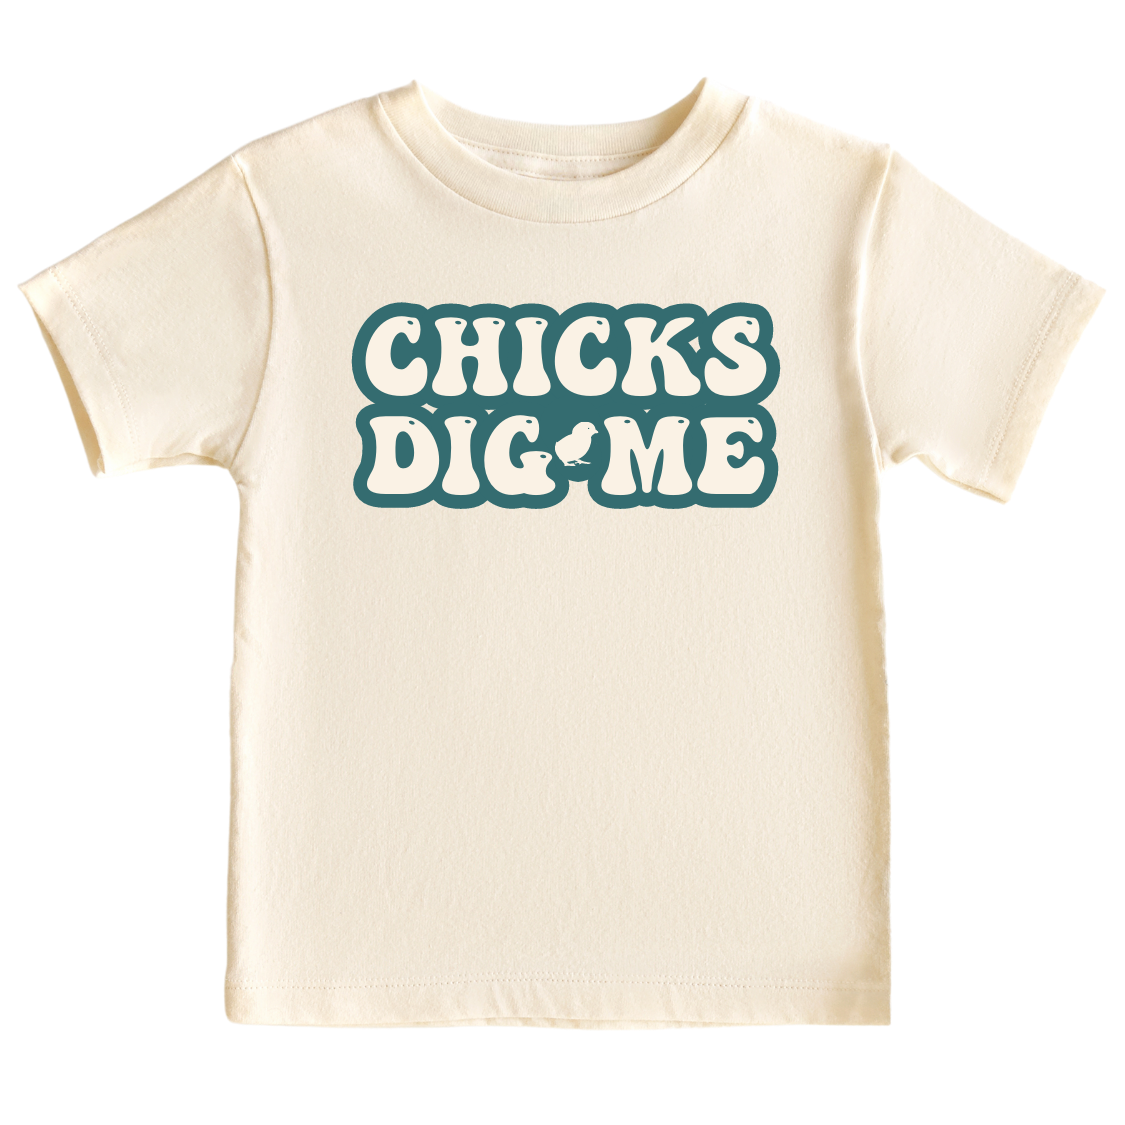 Natural Kid's t-shirt featuring a cute and eye-catching printed graphic of bold green text saying 'Chicks Dig Me.' Embrace your child's charm and confidence with this playful tee.